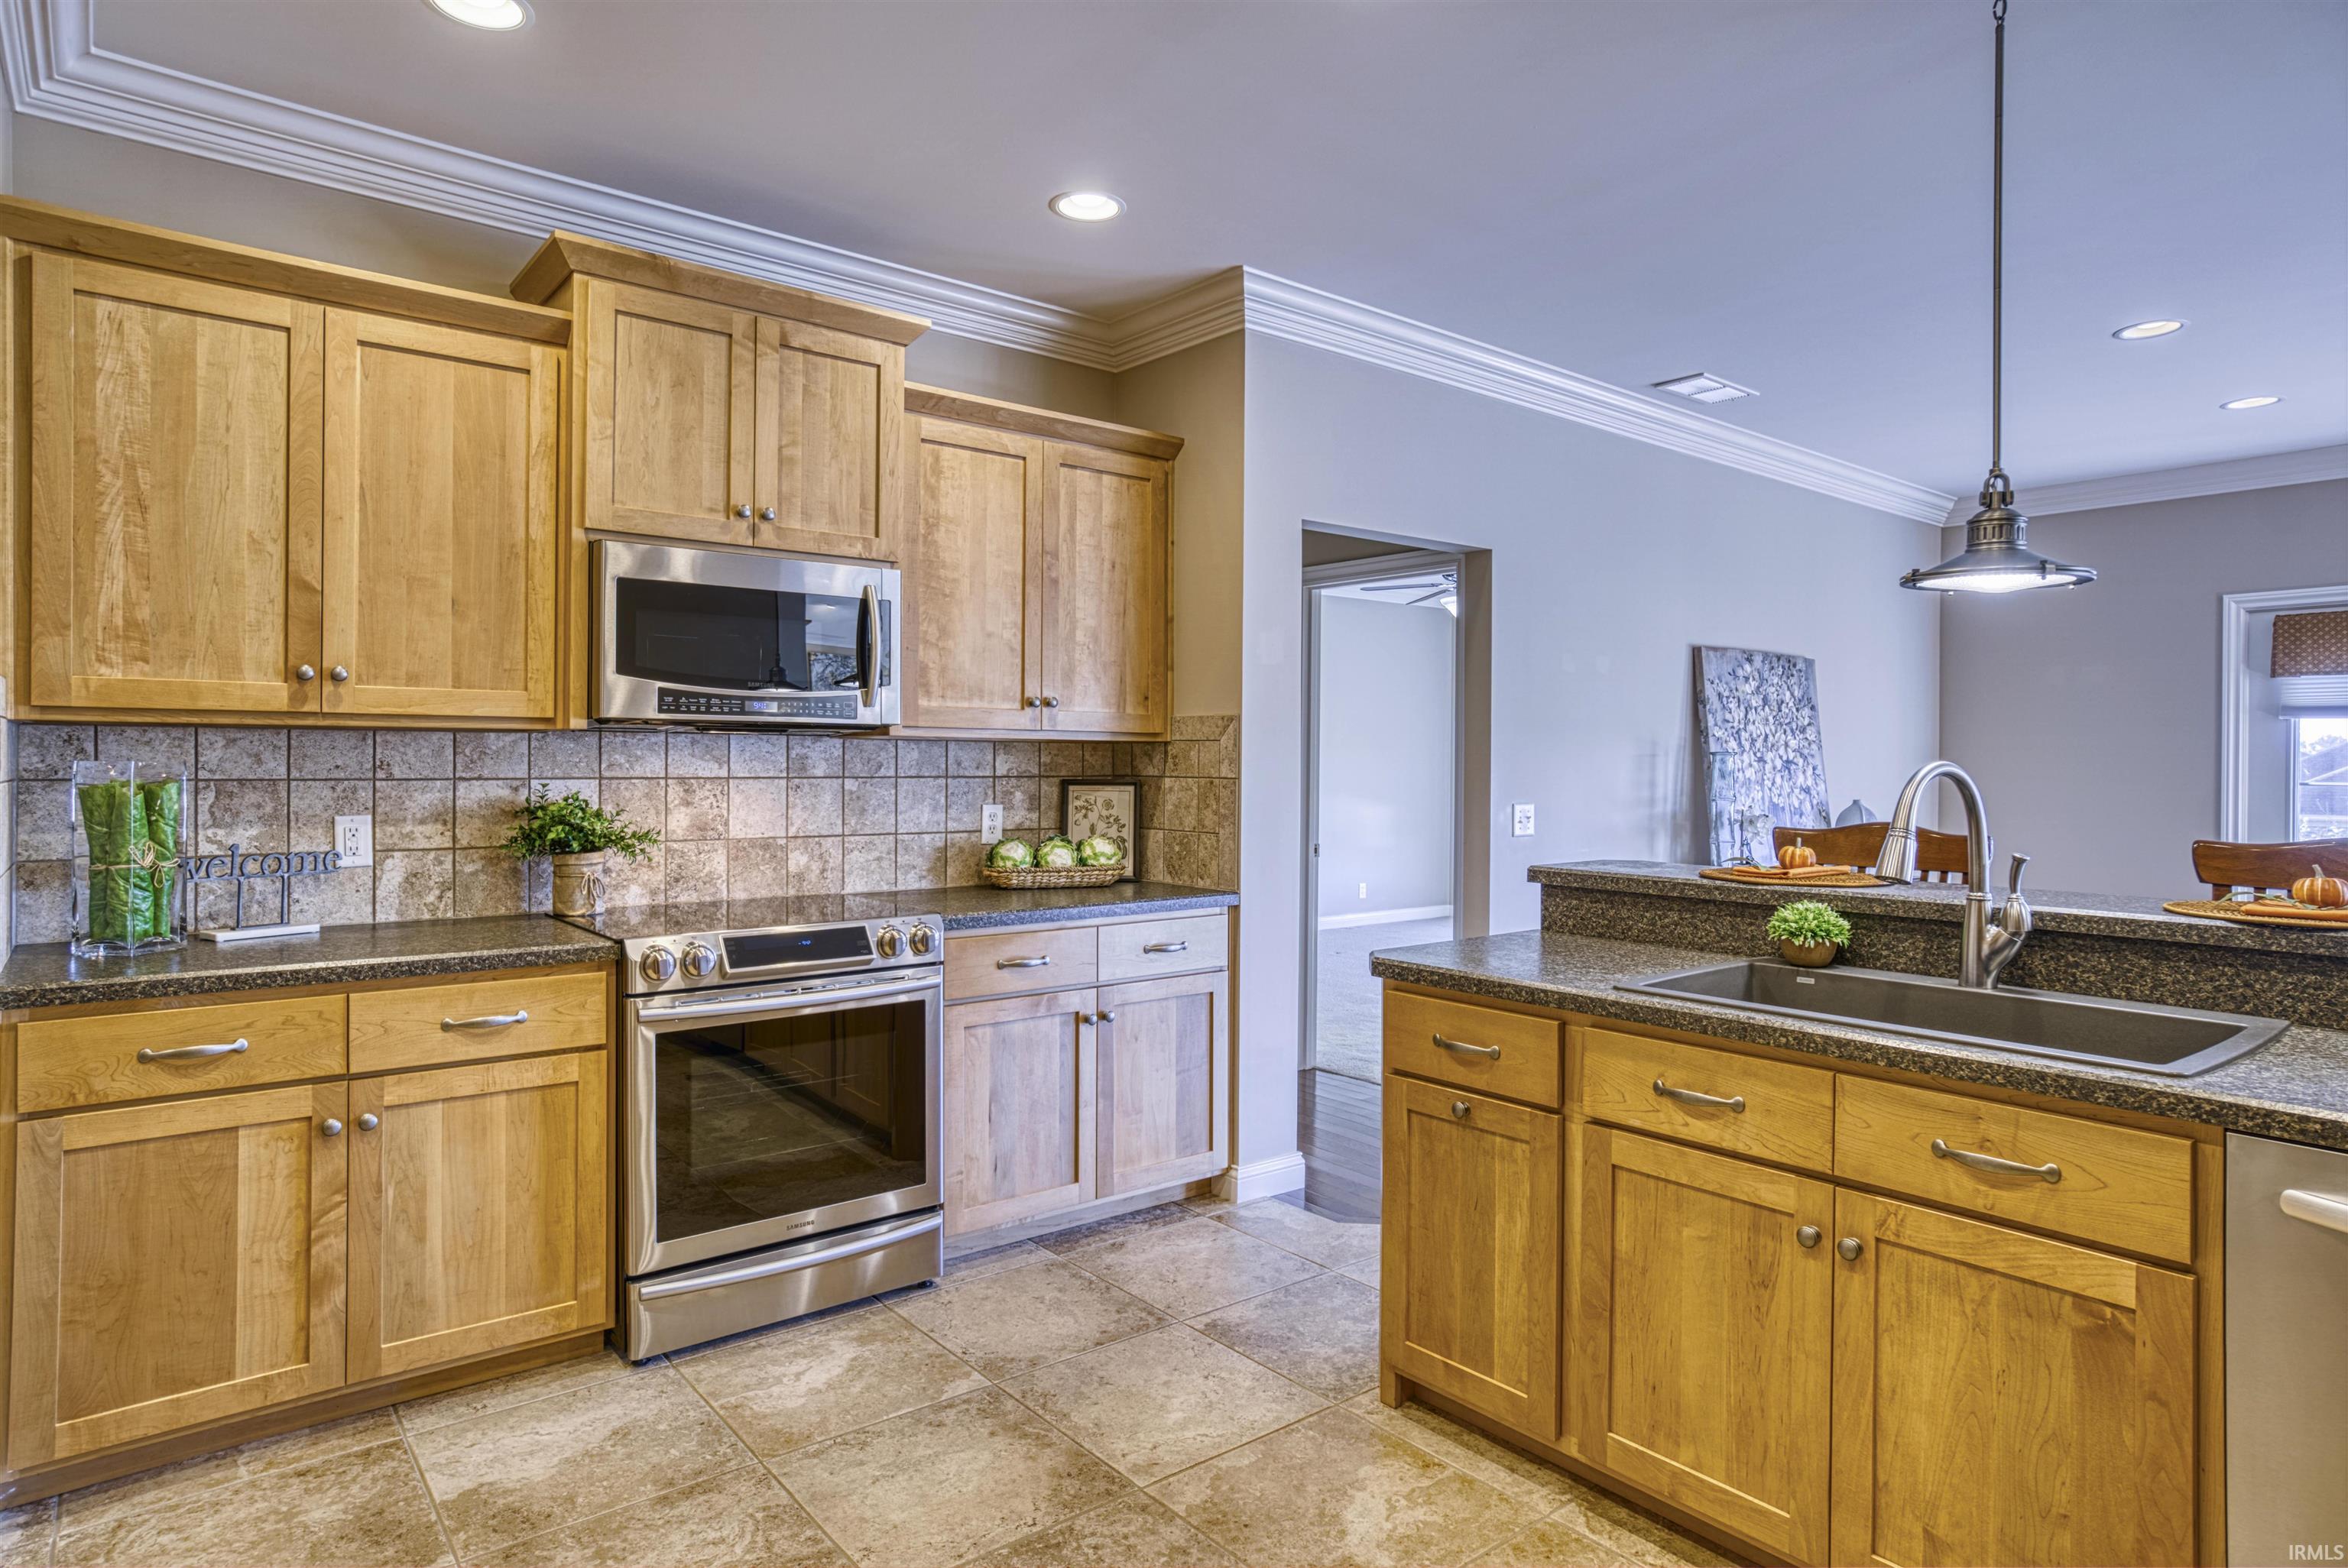 Updated stainless steel appliances and is open to the...